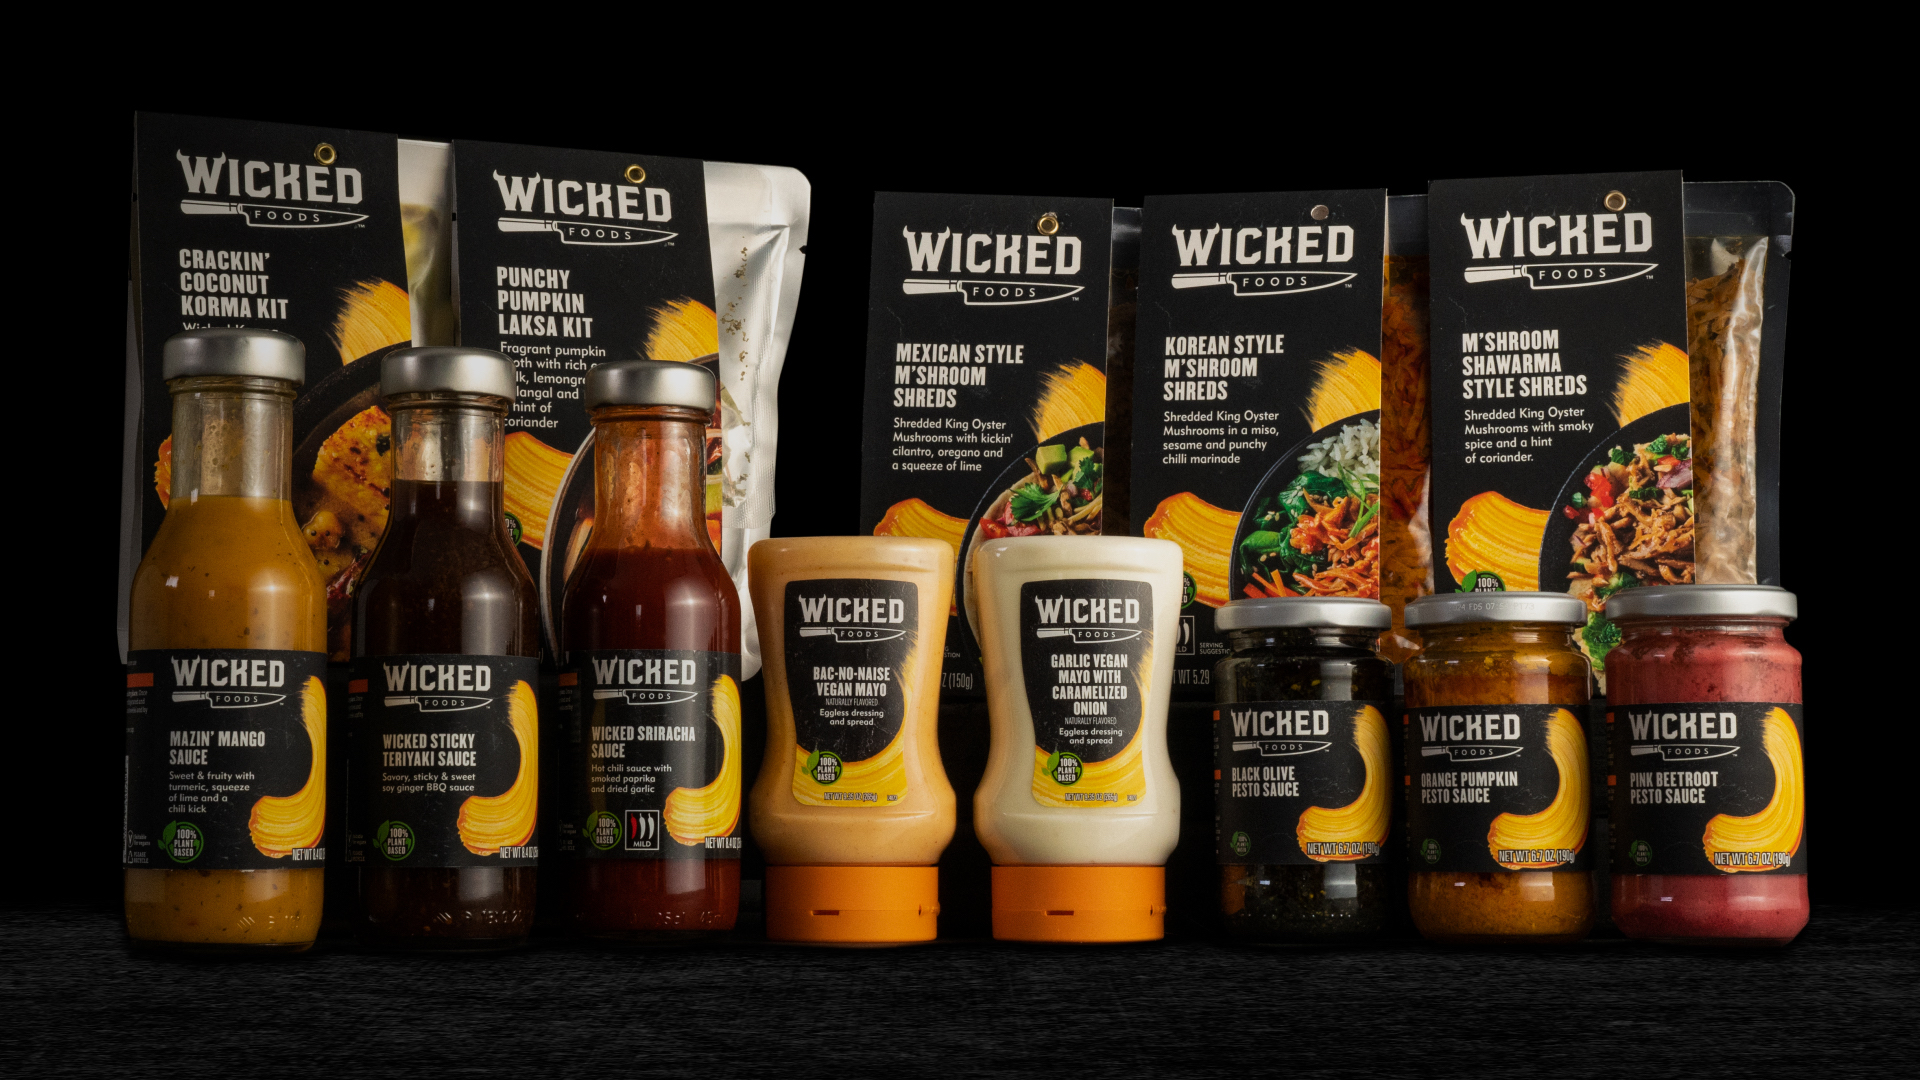 Offering the largest variety of plant-based foods, Wicked Kitchen is experiencing major growth in the U.S. and the U.K., expands into Finland and soon to Asia.